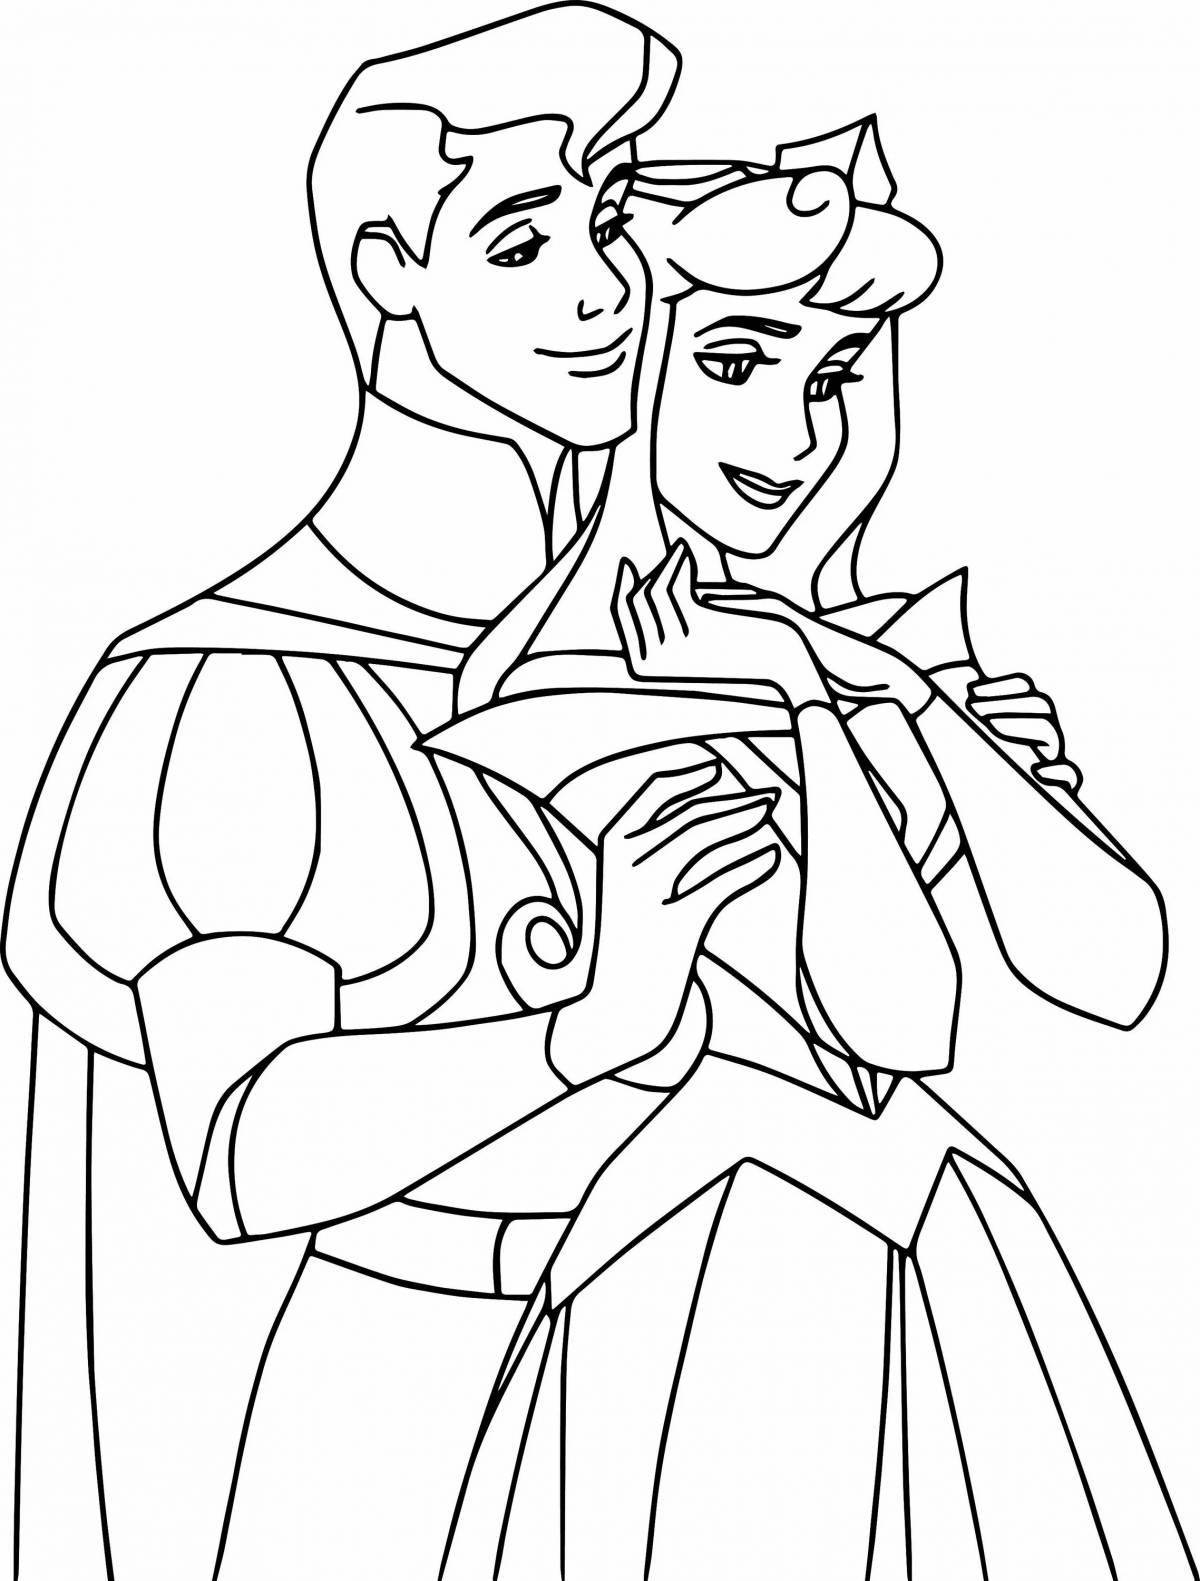 Colorful sleeping beauty coloring book for kids